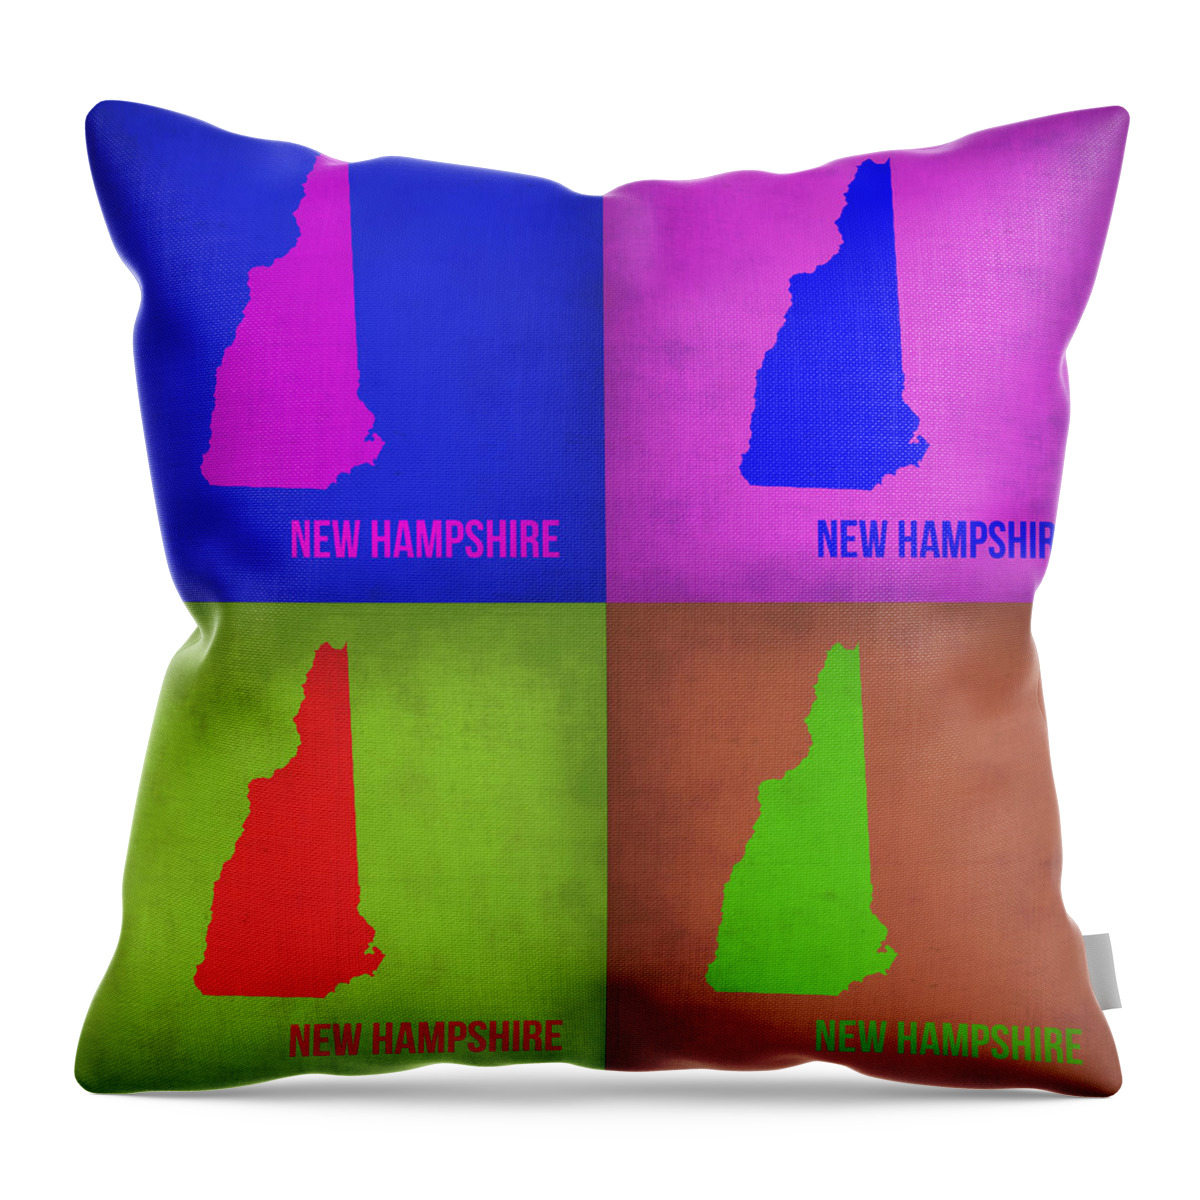 New Hampshire Map Throw Pillow featuring the painting New Hampshire Pop Art Map 1 by Naxart Studio